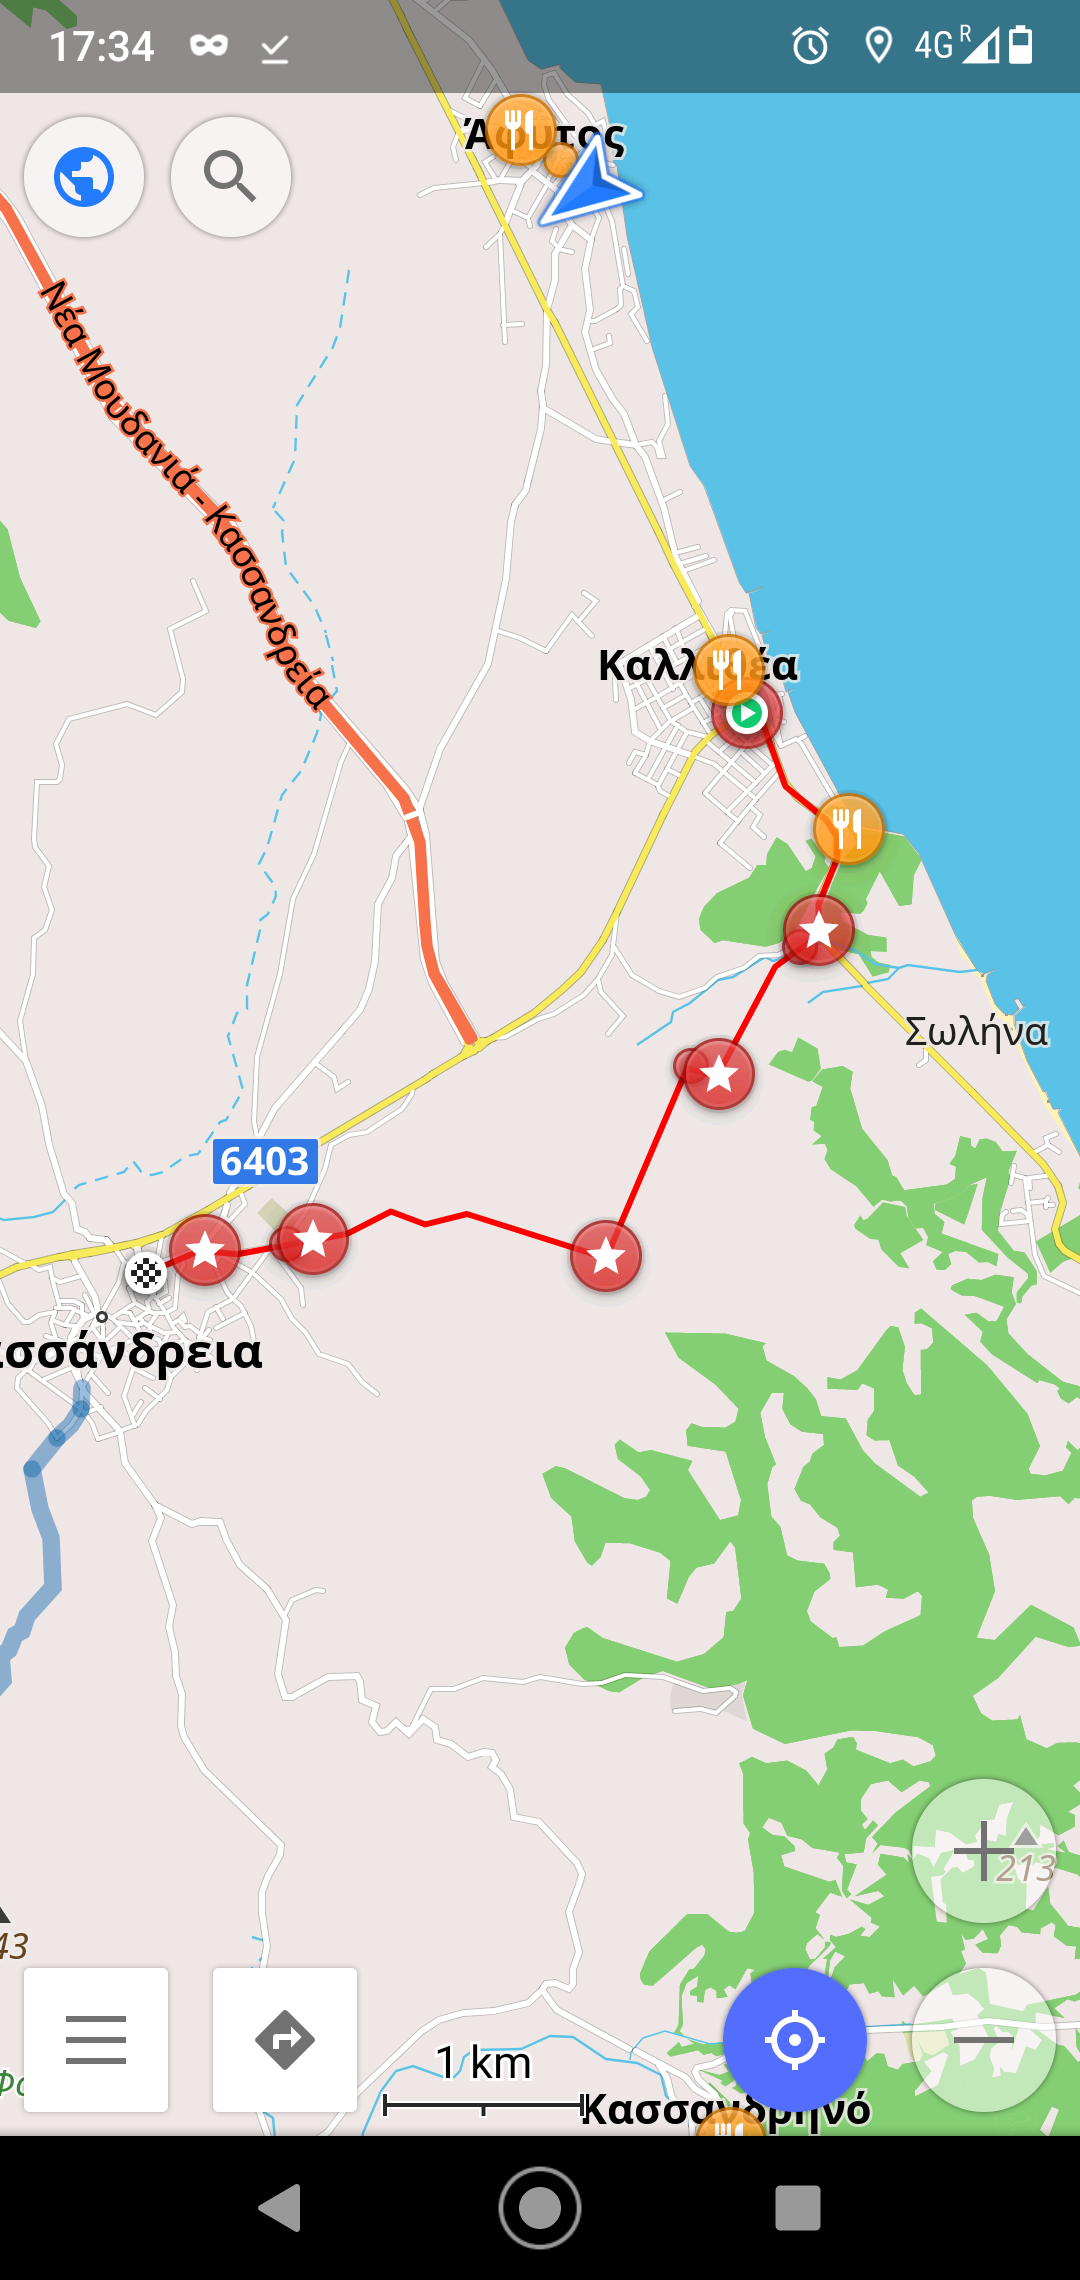 Screenshot of the route displayed in OsmAnd on the phone